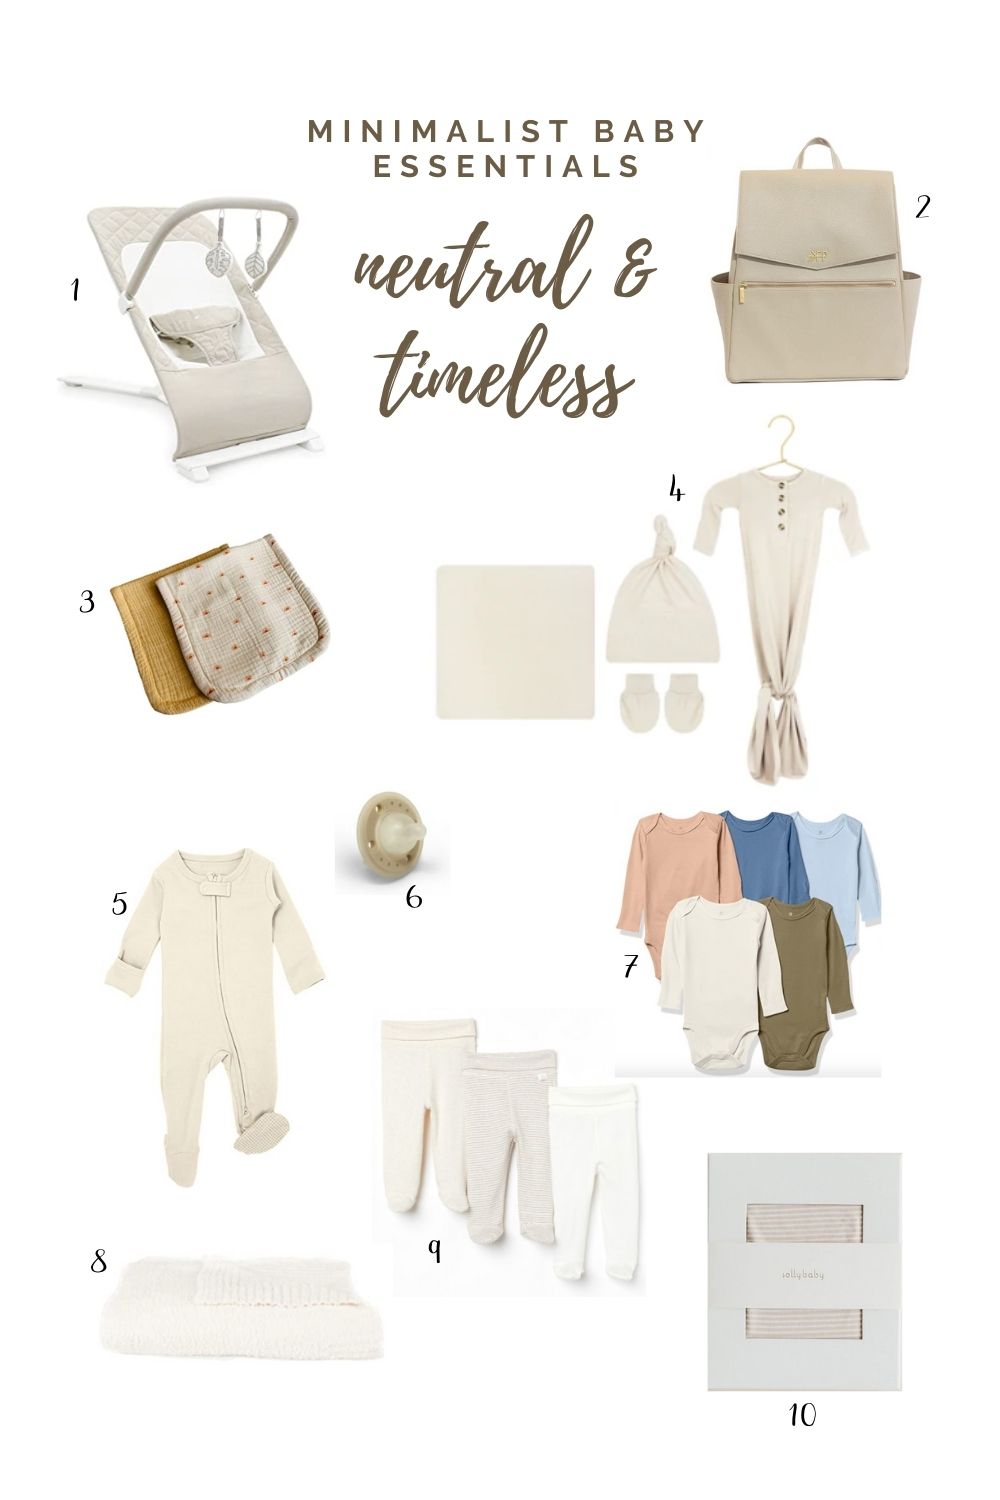 What does a baby really need? These minimalist baby essentials are neutral and timeless. They will work for either gender and can be passed down to any of your babies in the future!